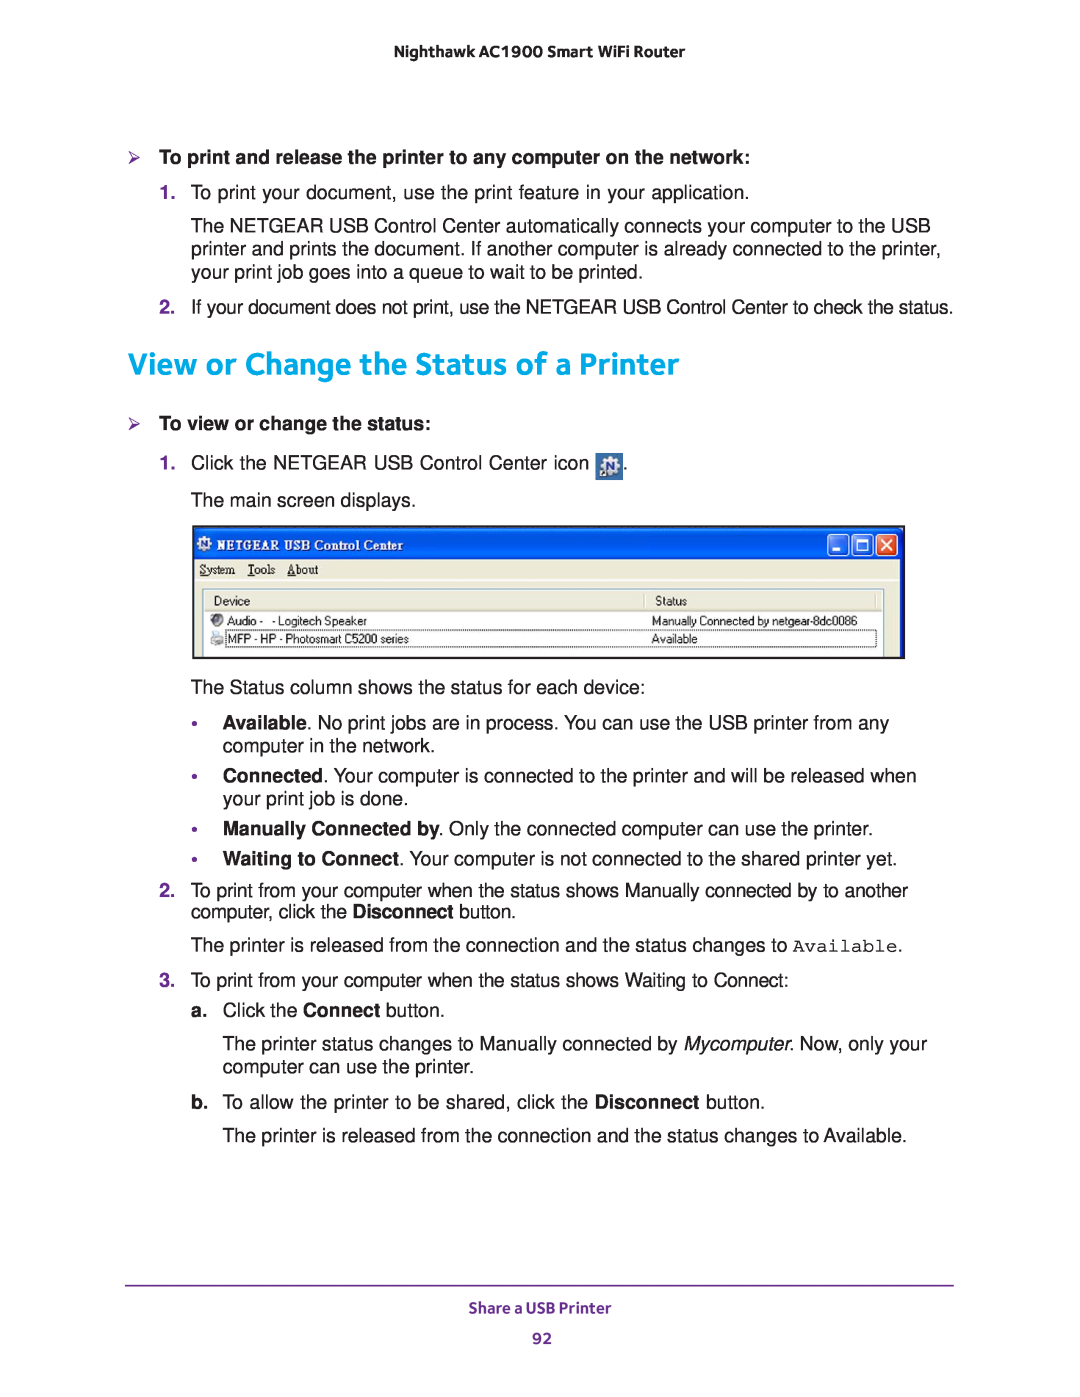 NETGEAR Model R7000 user manual View or Change the Status of a Printer,  To view or change the status 